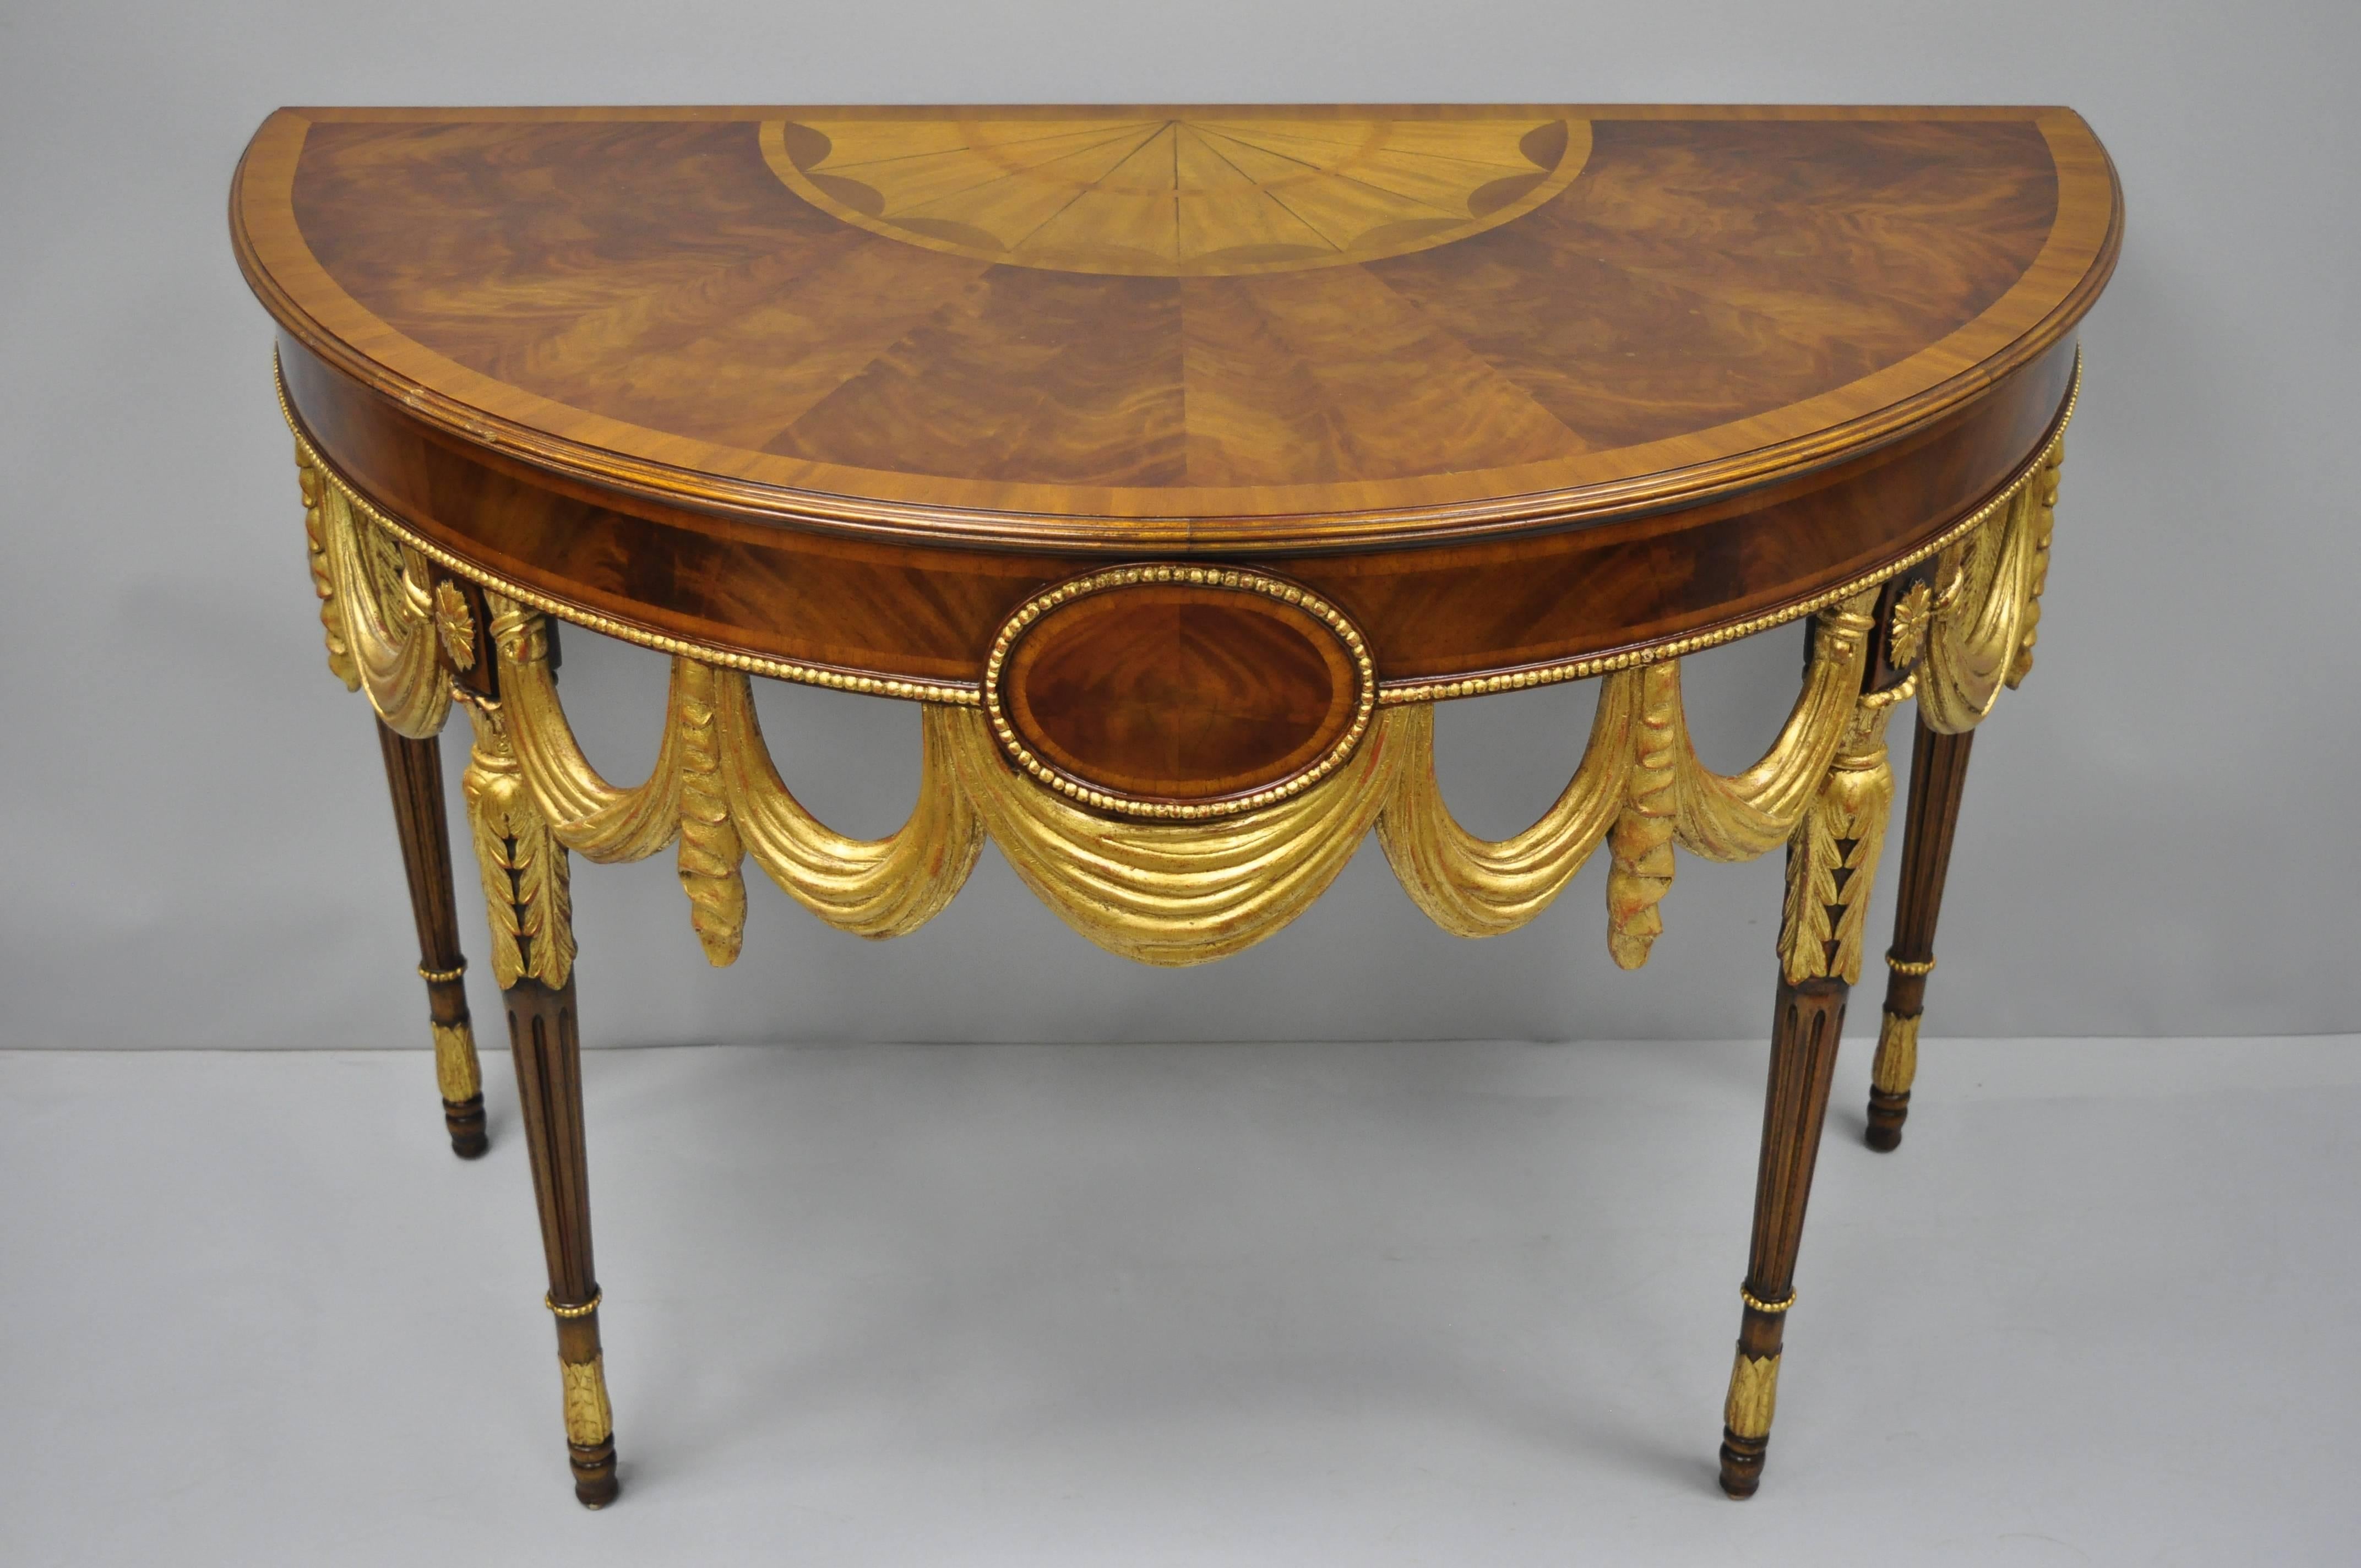 Maitland Smith half round inlaid demilune console table. Item features a crotch mahogany sunburst inlaid top, gold gilt finish, drape carved skirt, beautiful wood grain, original label, tapered legs, great style and form, circa early 21st century.